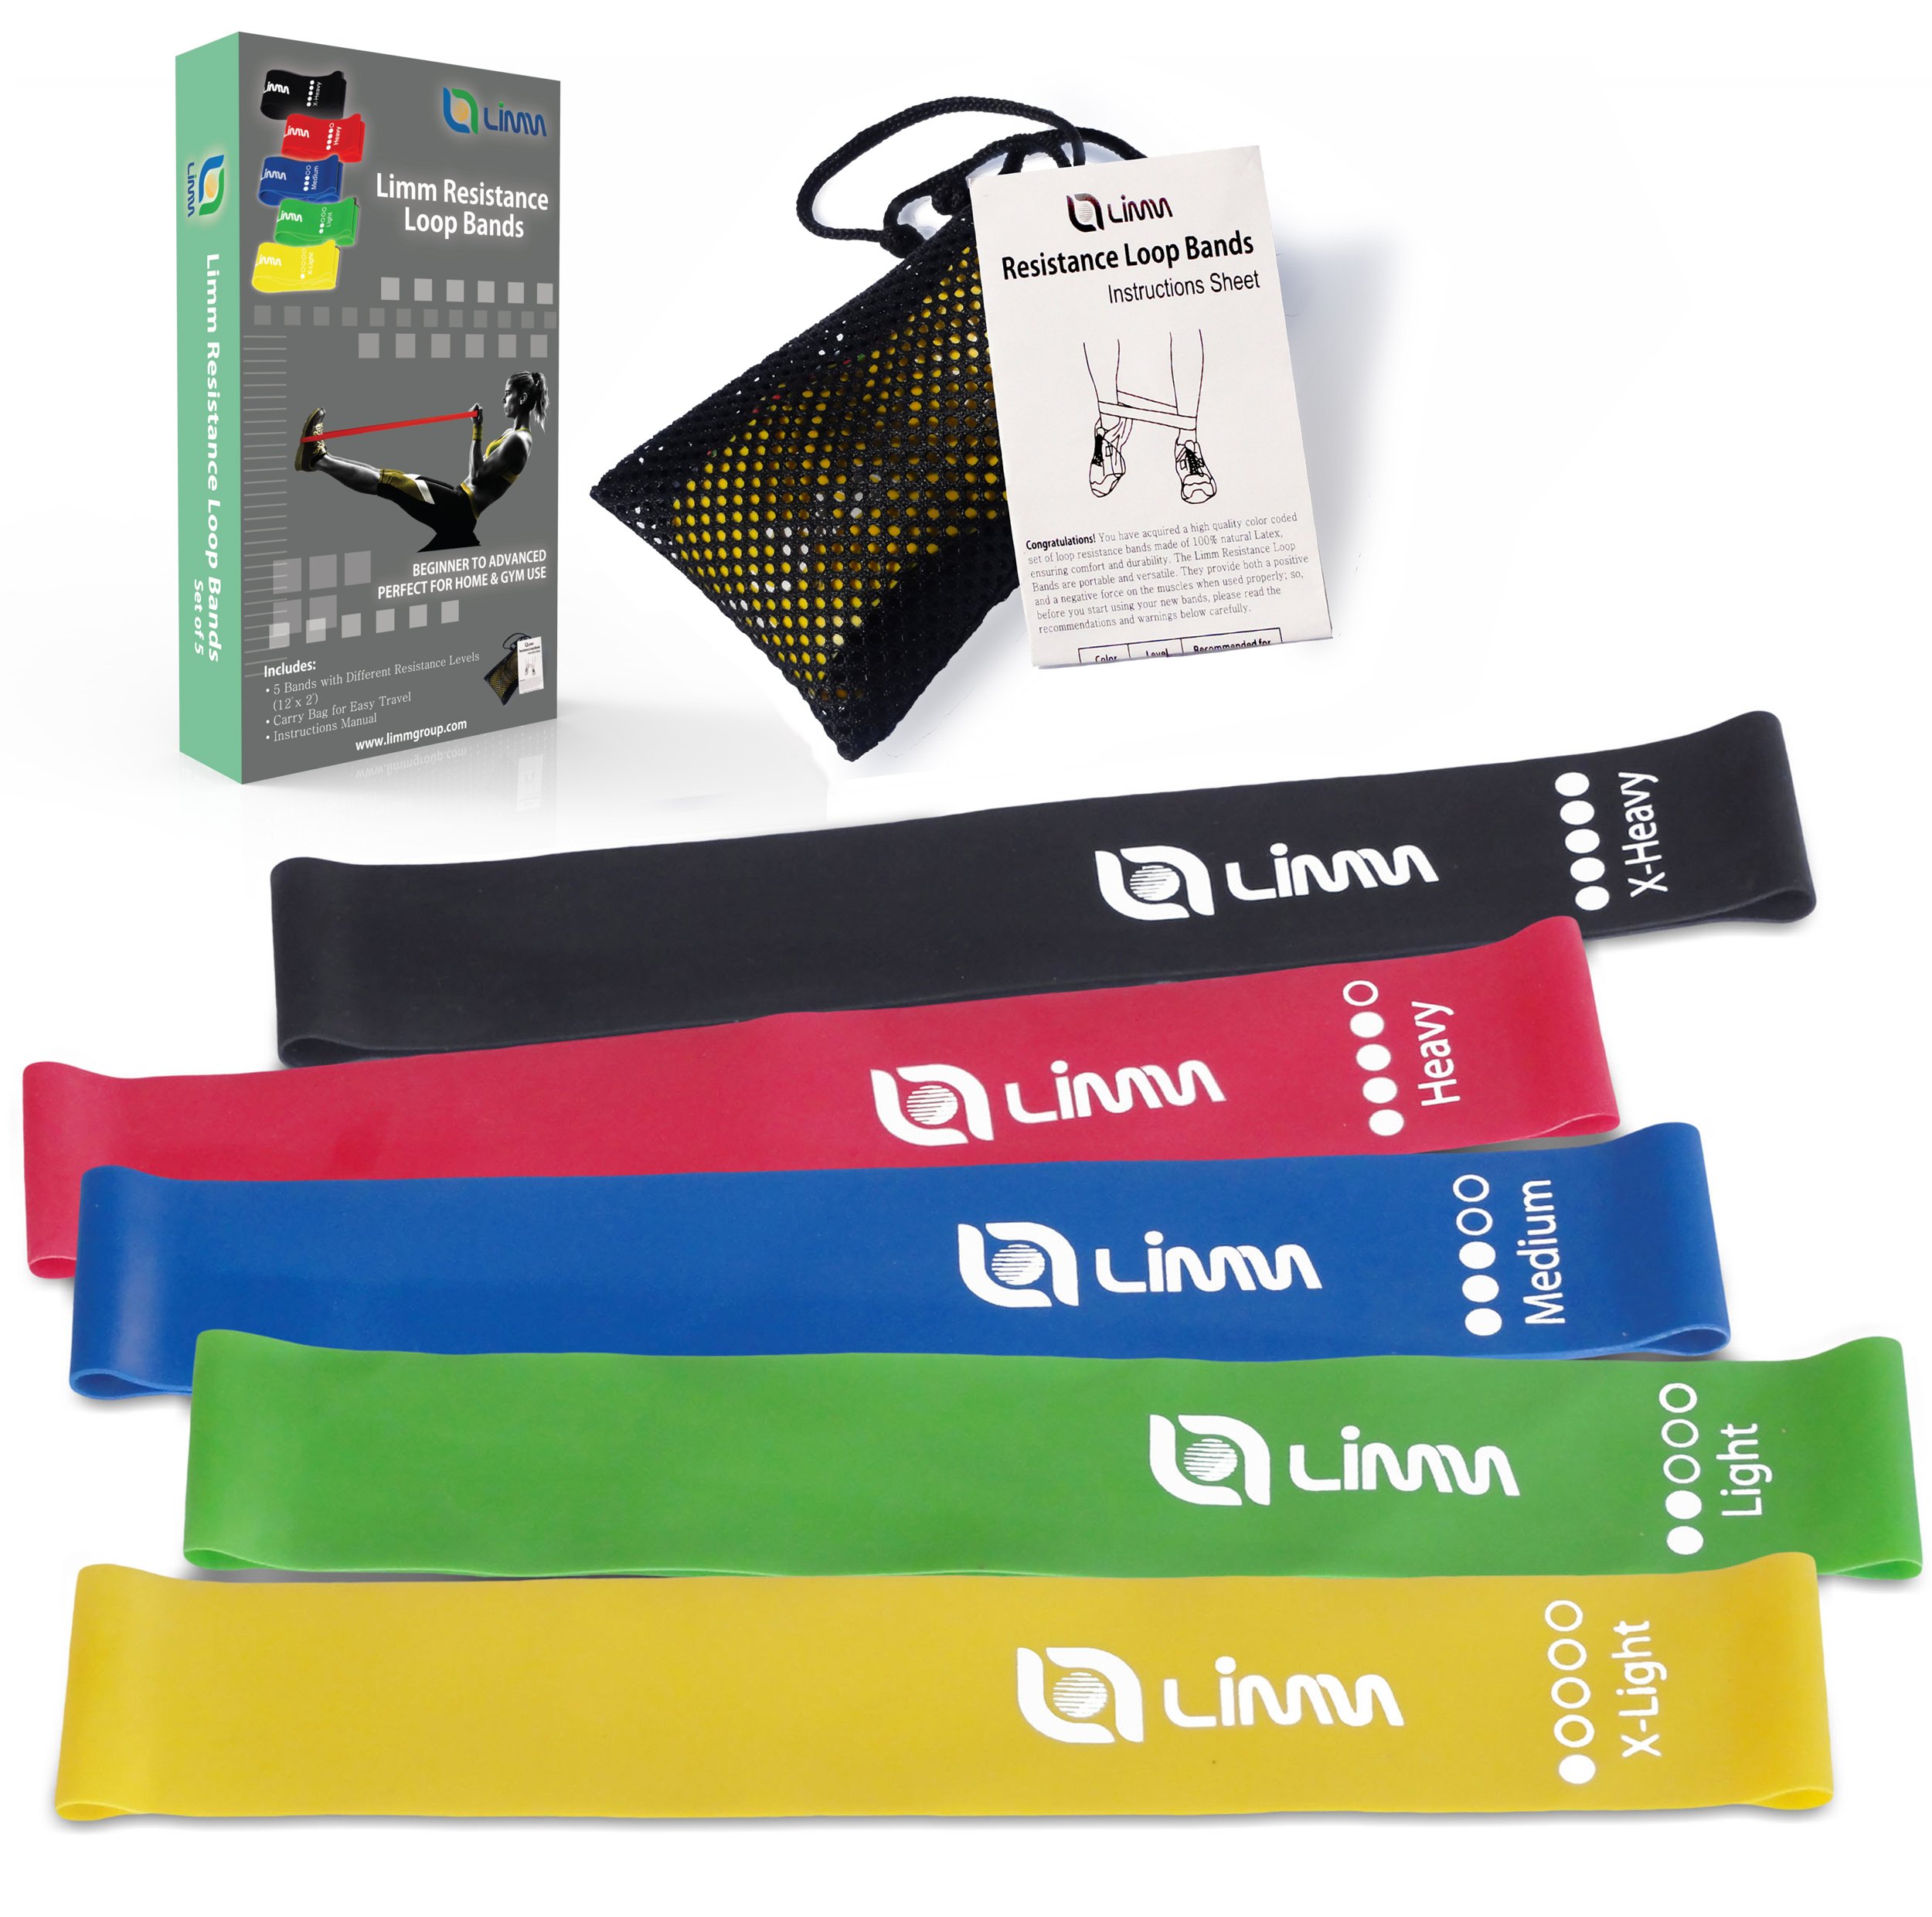 Limm Resistance Loop Exercise Bands - Set of 5 Stretch Bands for Working Out with Instruction Guide & Carry Bag - Elastic Band for Home Workout & Physical Therapy for Women and Men